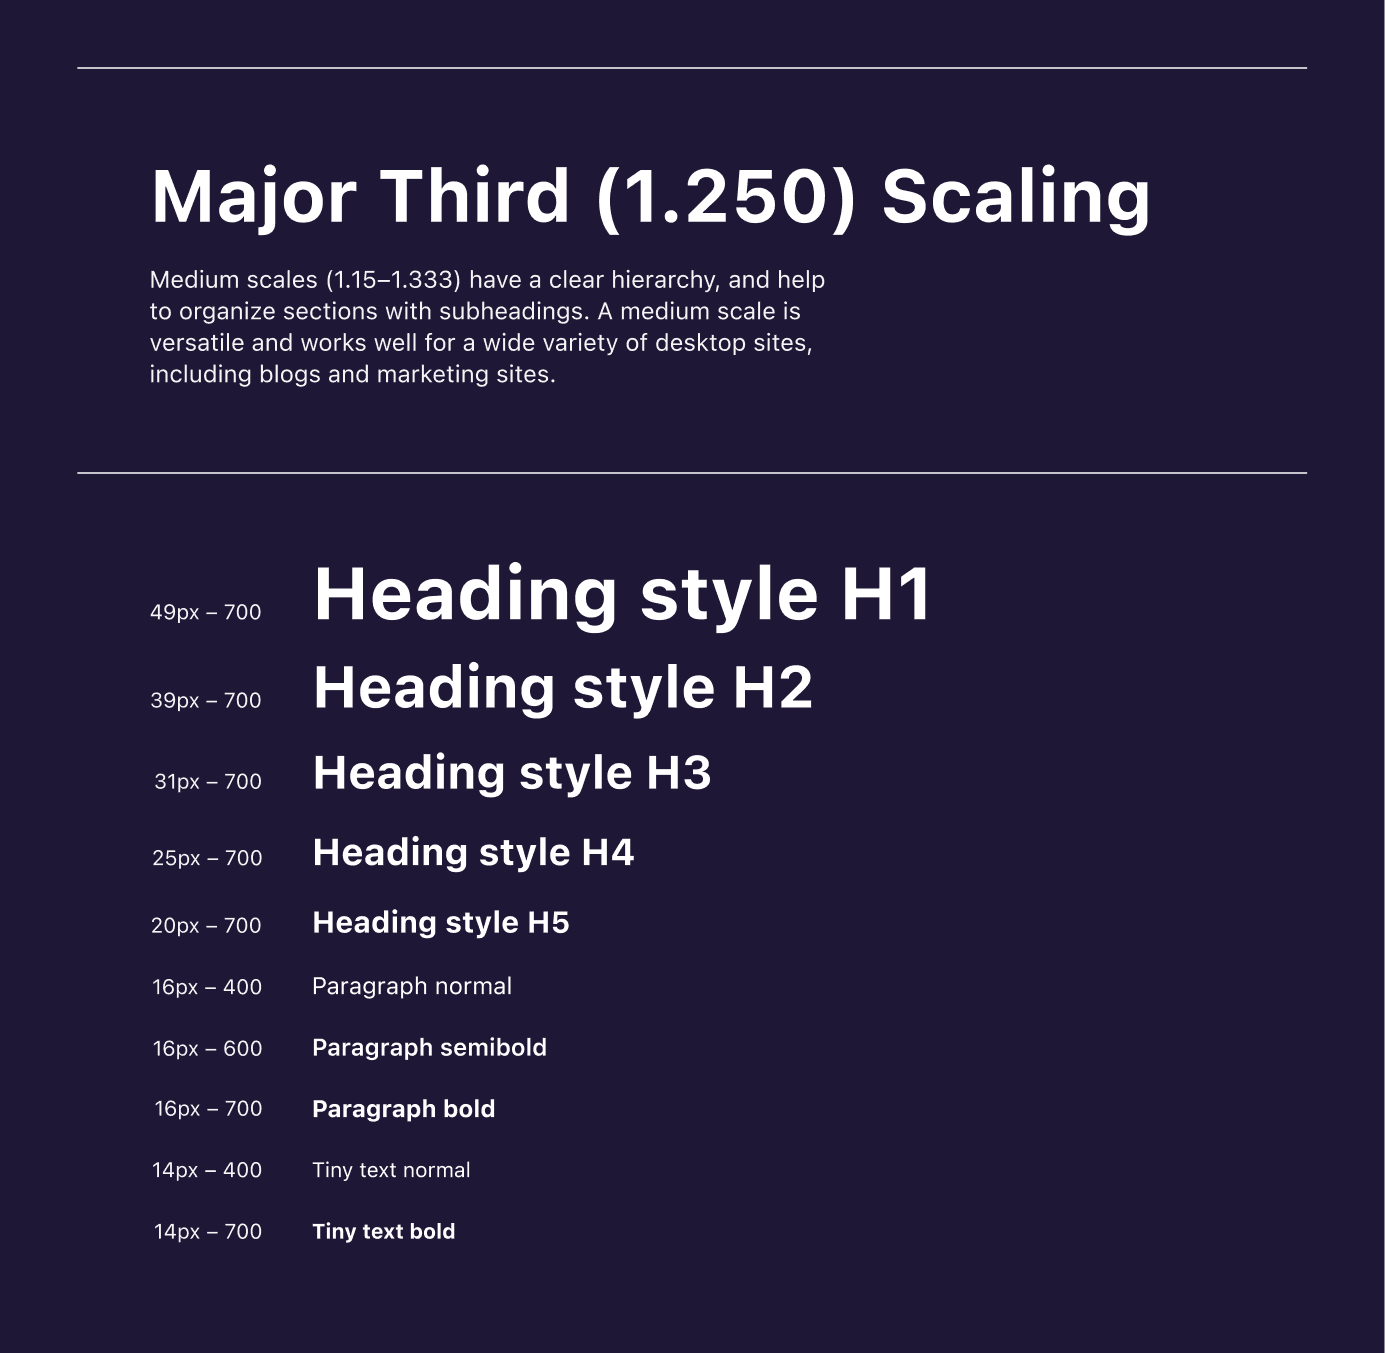 Font scale used for the doggy app